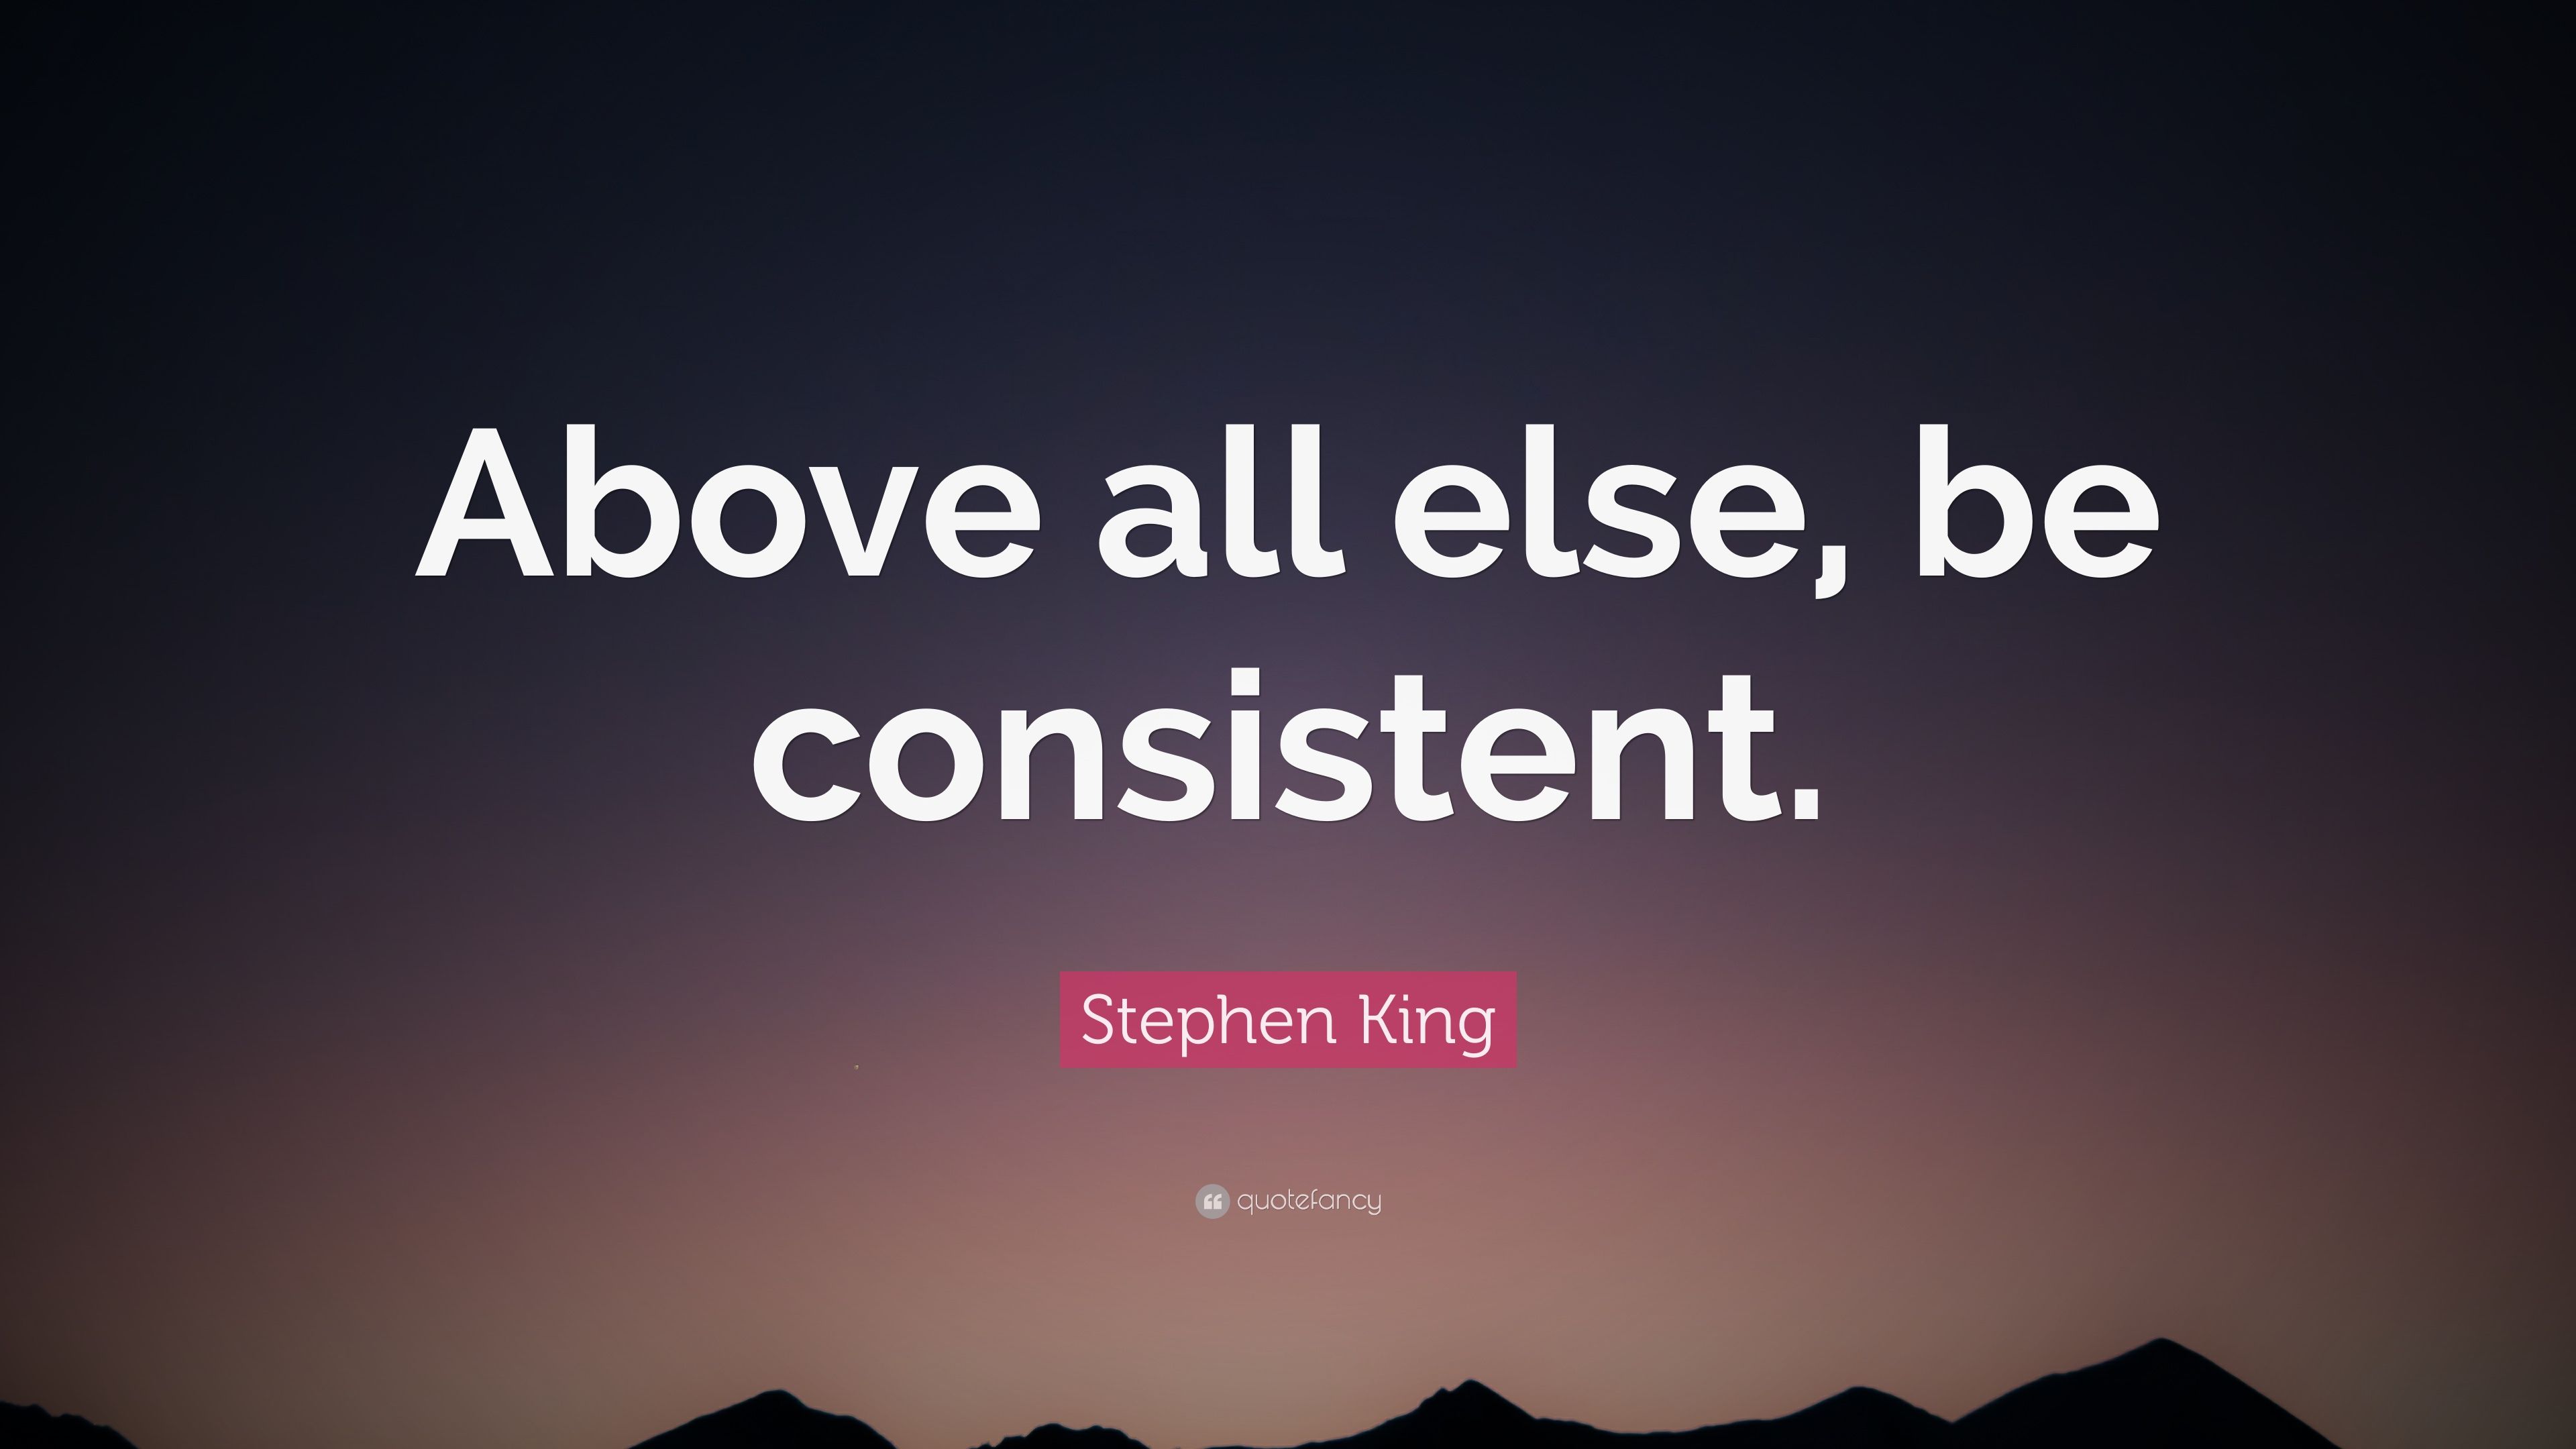 Stephen King Quote: “Above all else, be .quotefancy.com